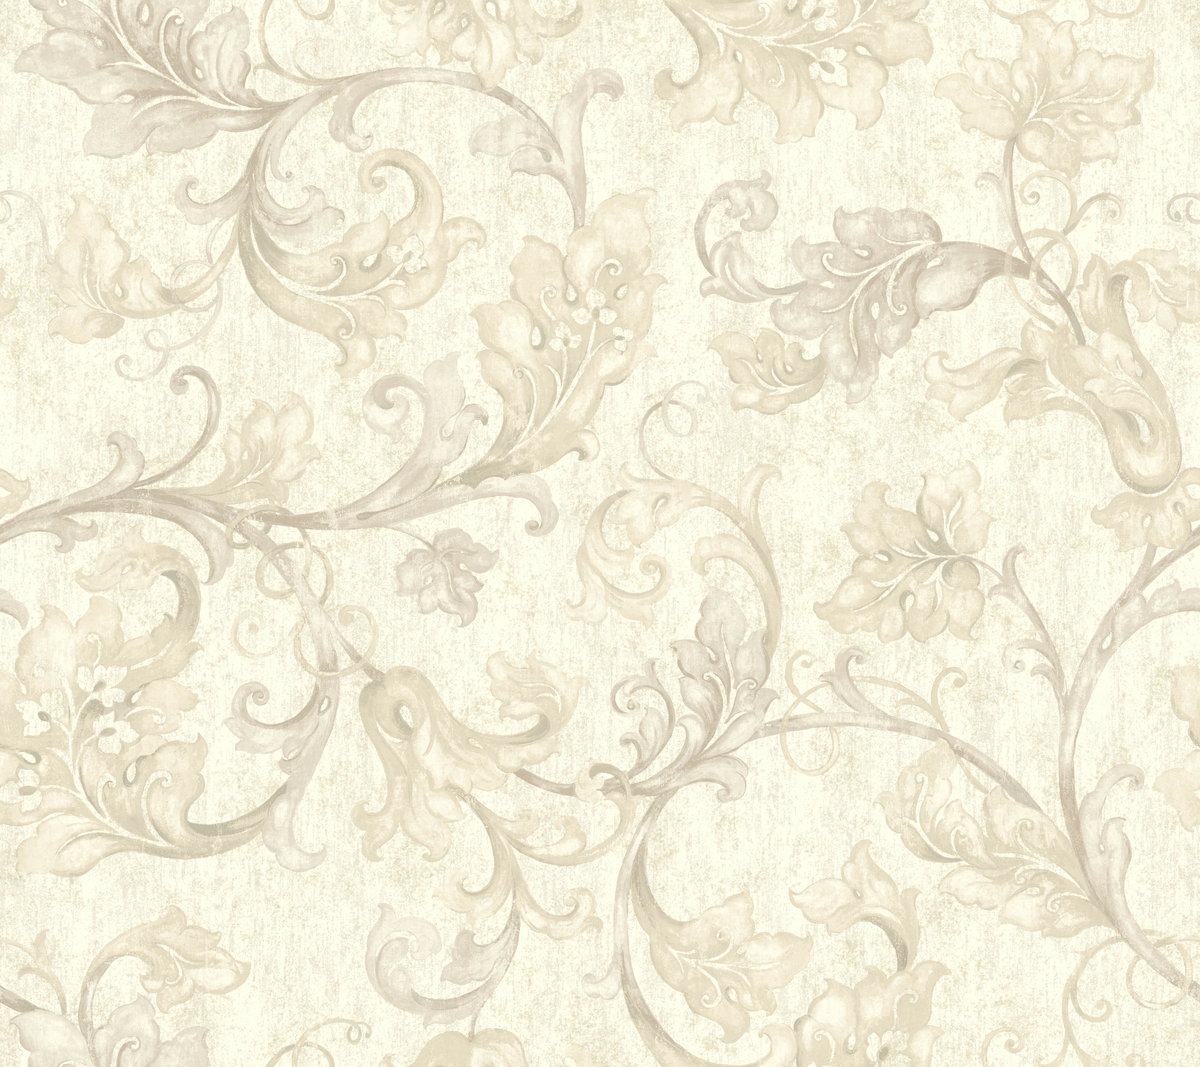 Acanthus Leaf Trail Wallpaper |Wallpaper And Borders |The Mural Store